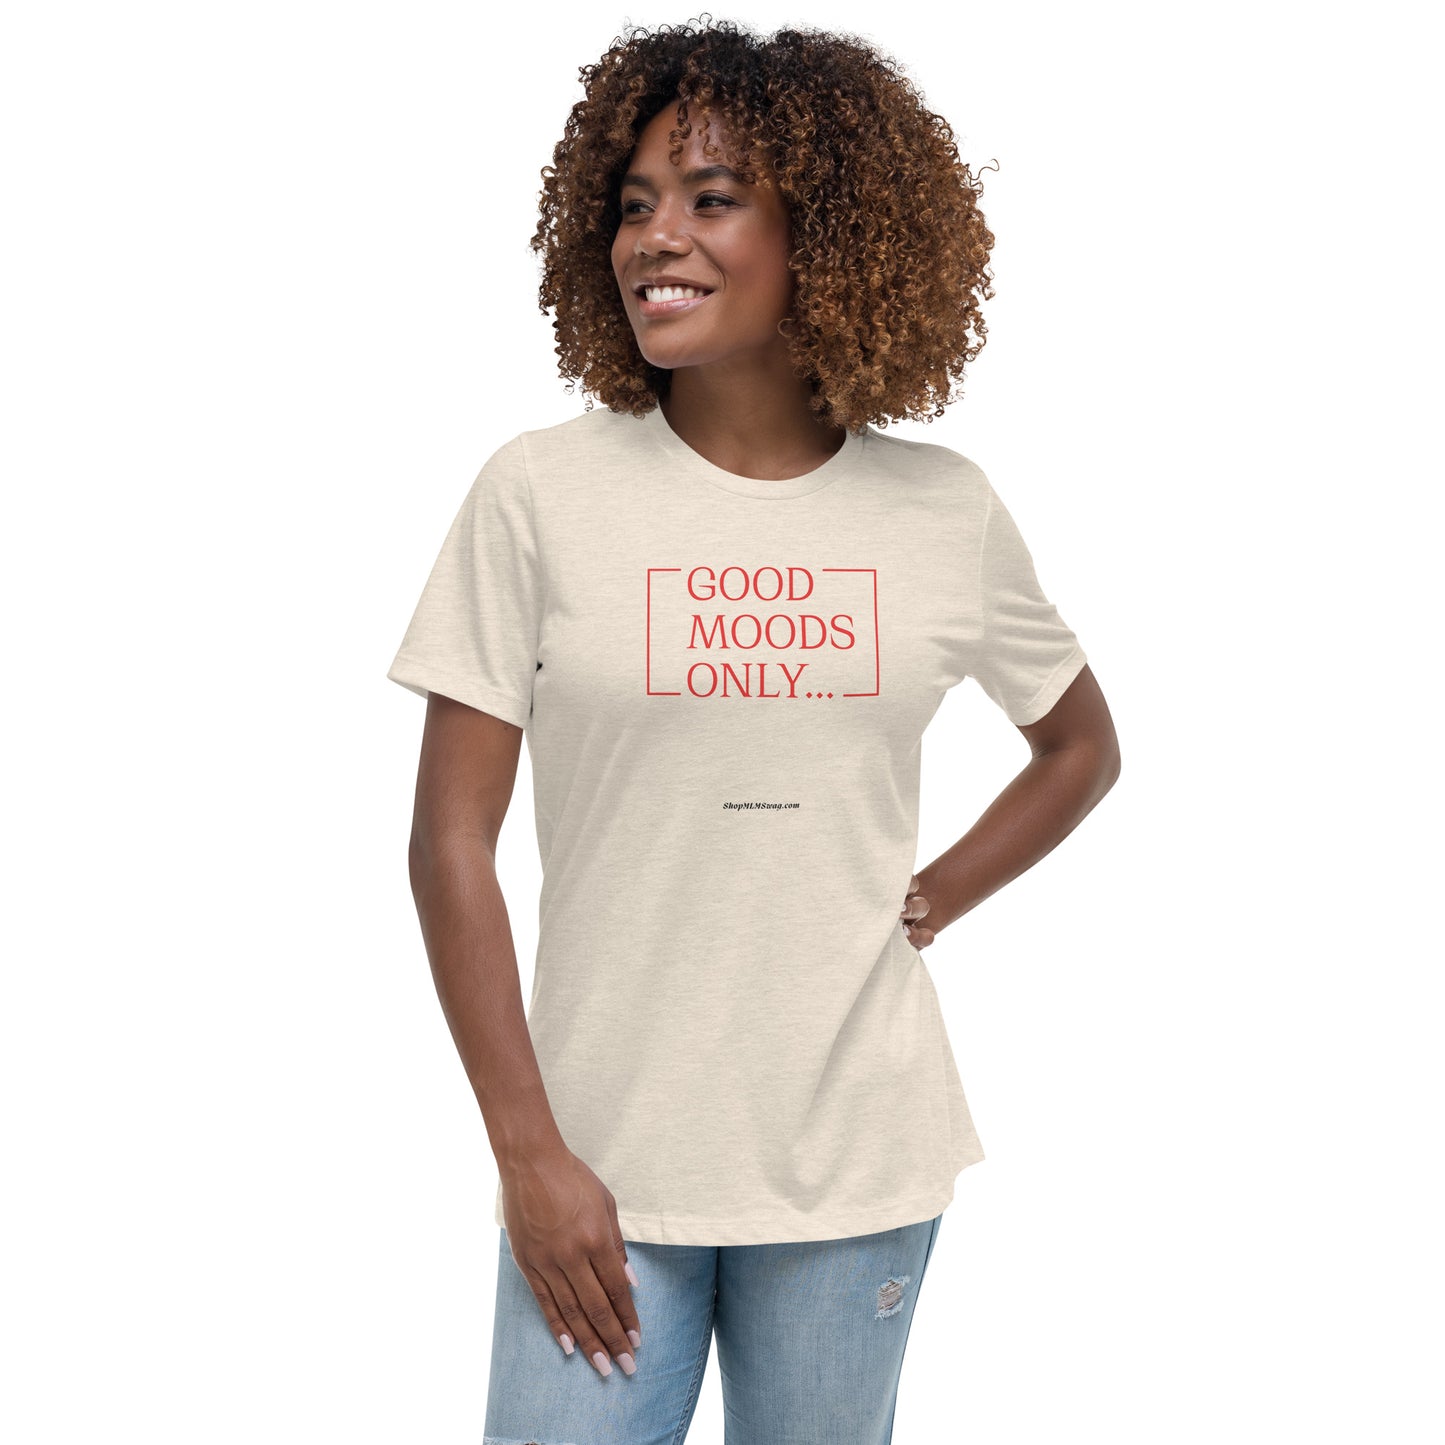 "Good Moods Only" Simple Red T-Shirt